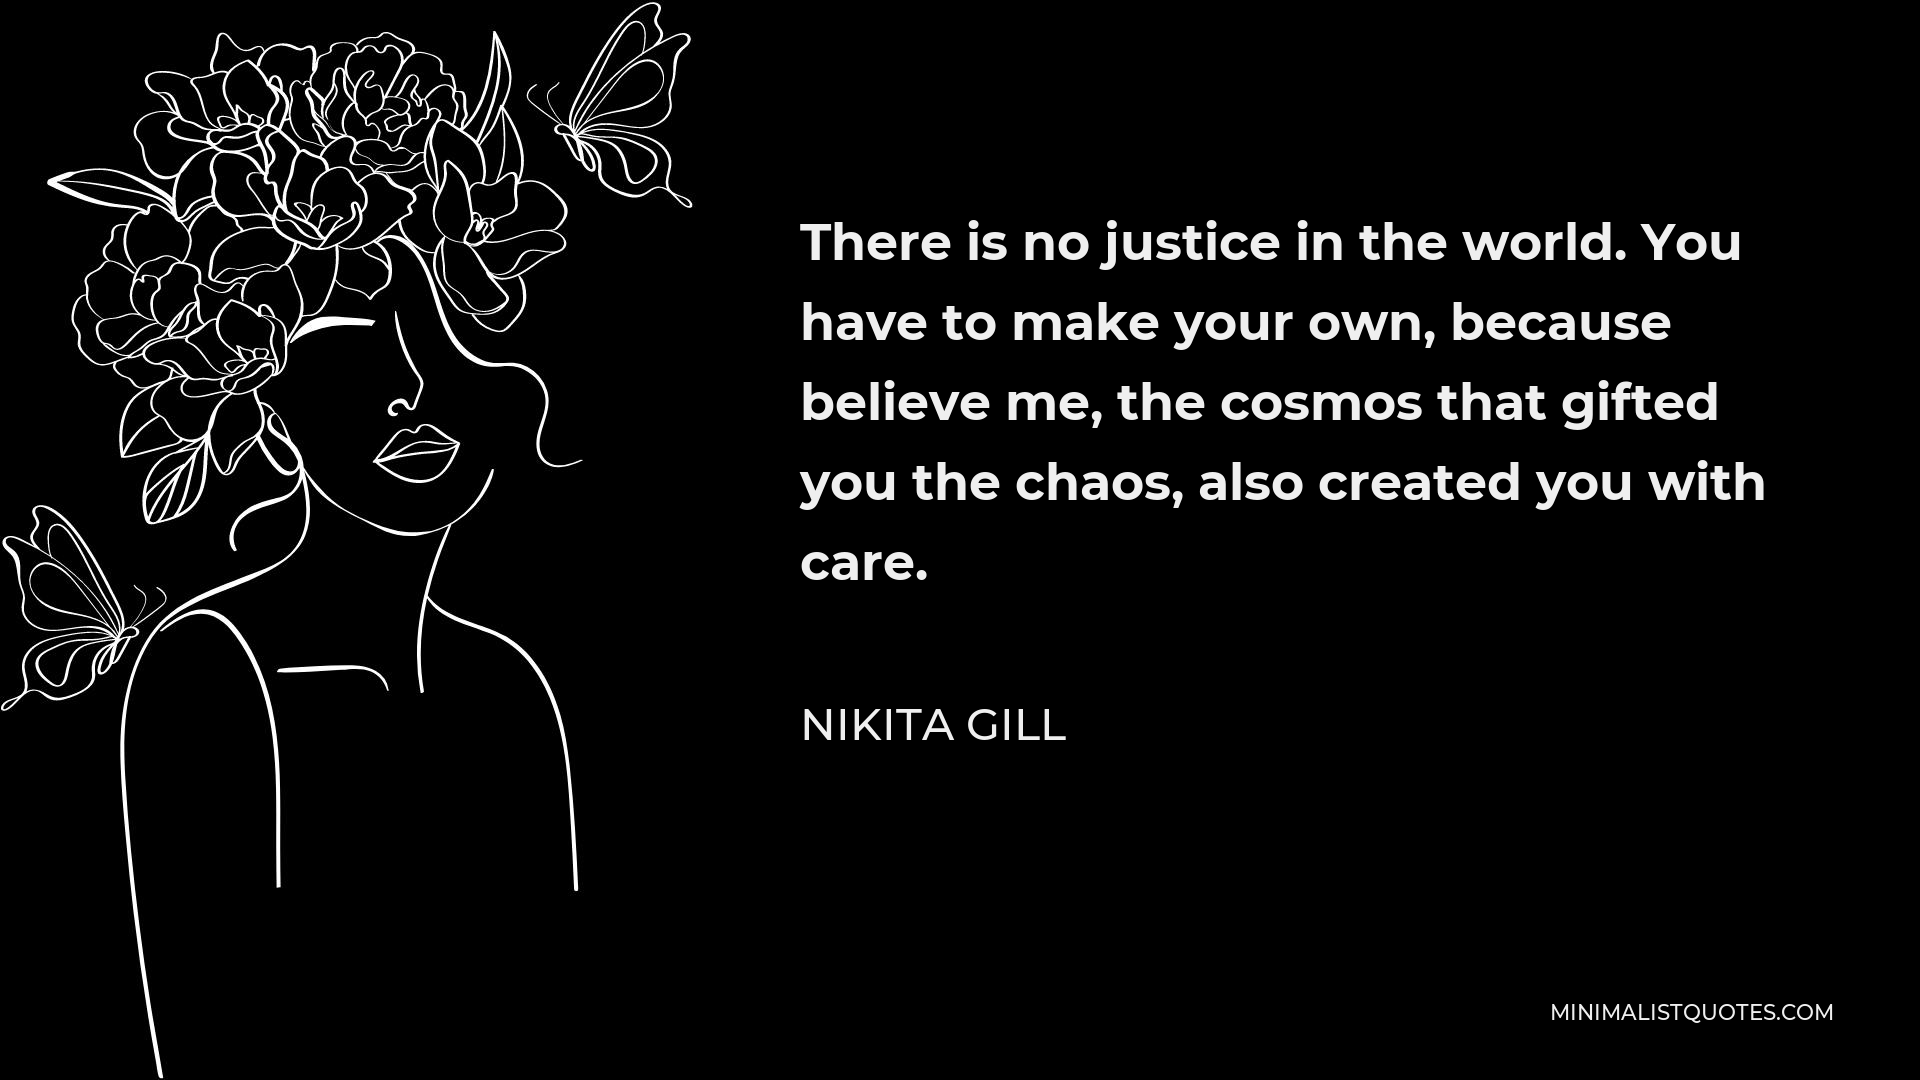 Nikita Gill Quote - There is no justice in the world. You have to make your own, because believe me, the cosmos that gifted you the chaos, also created you with care.